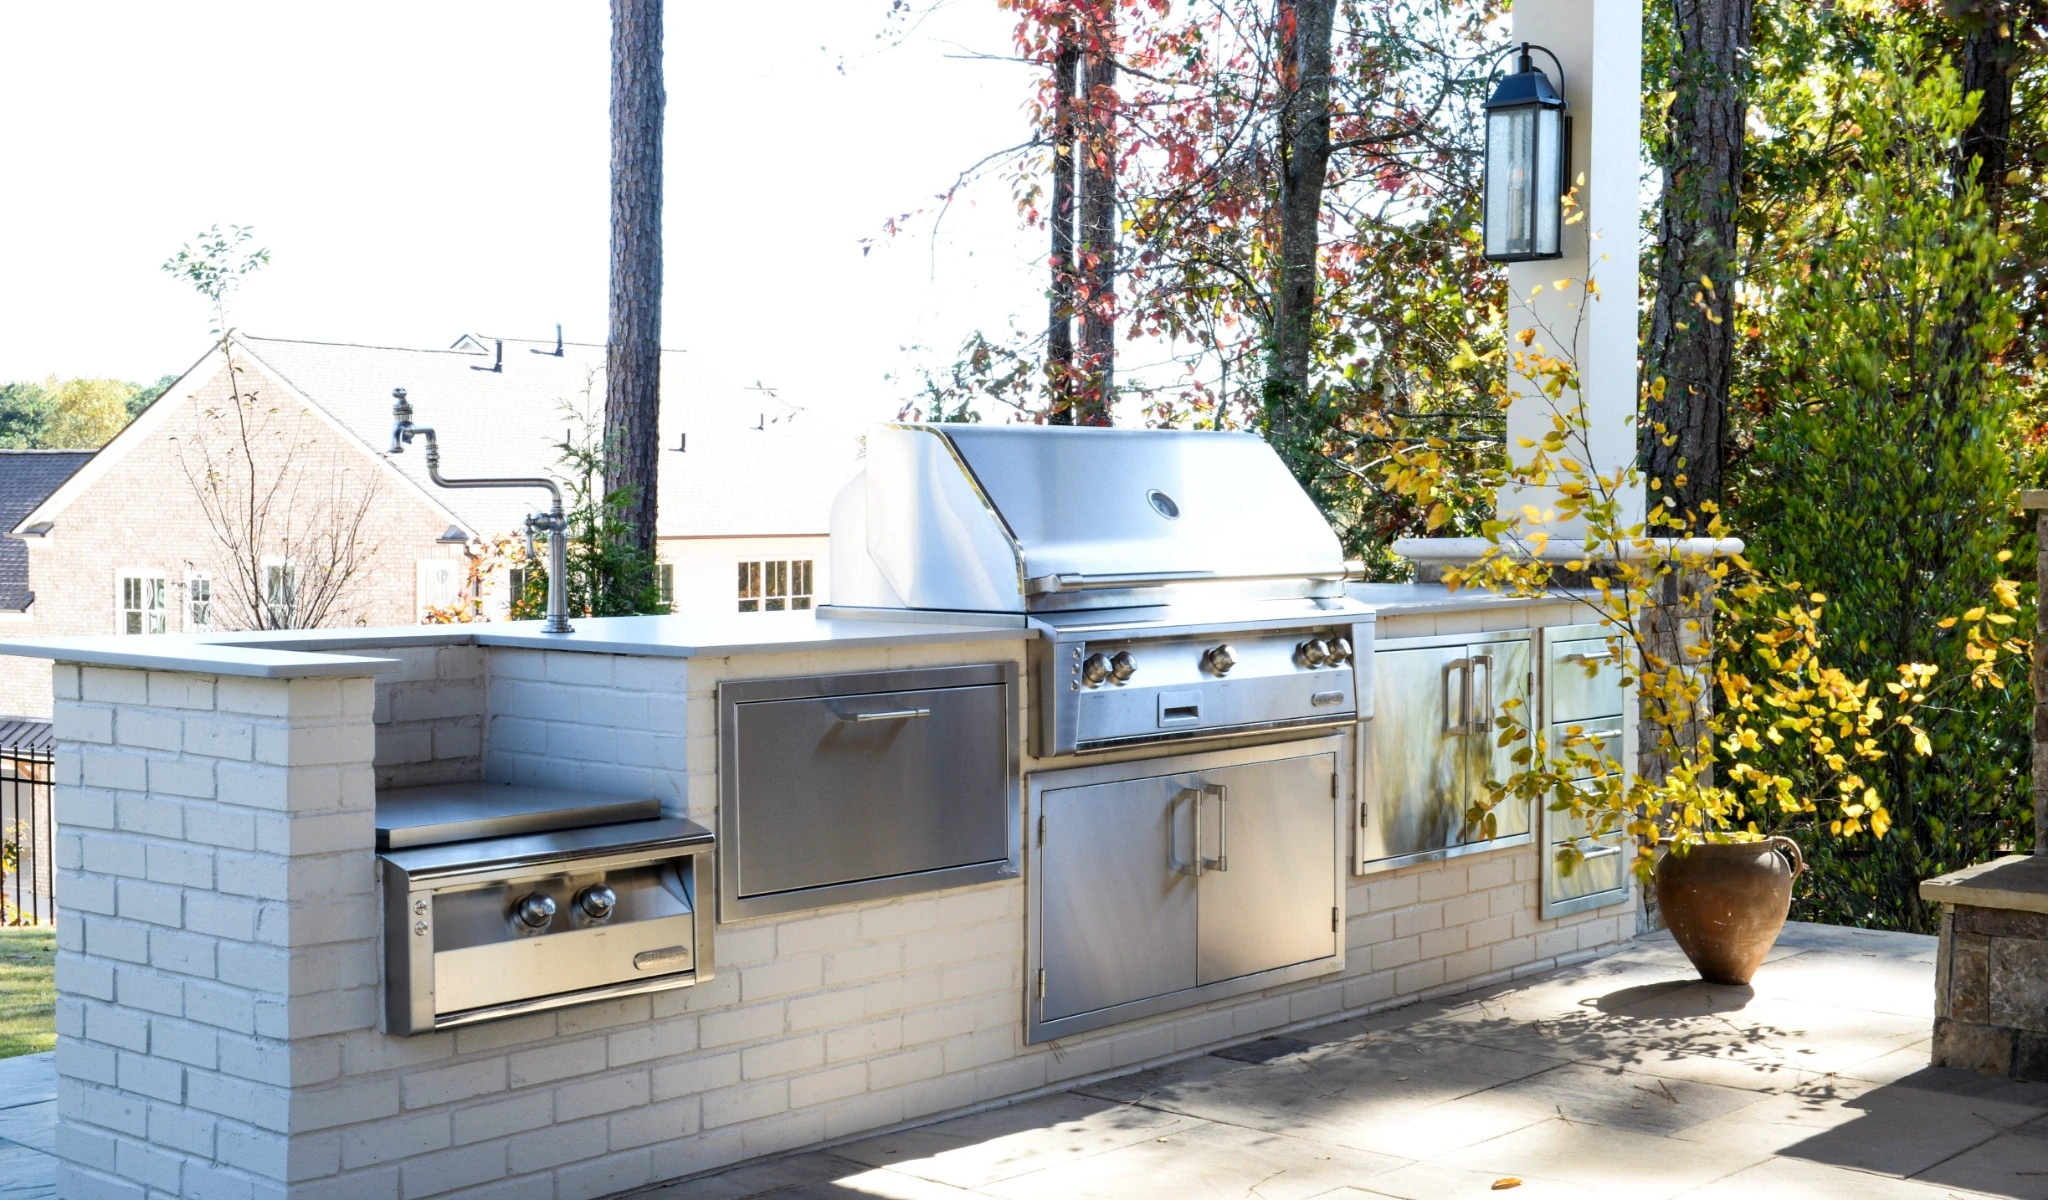 A stainless steel outdoor kitchen with appliances.